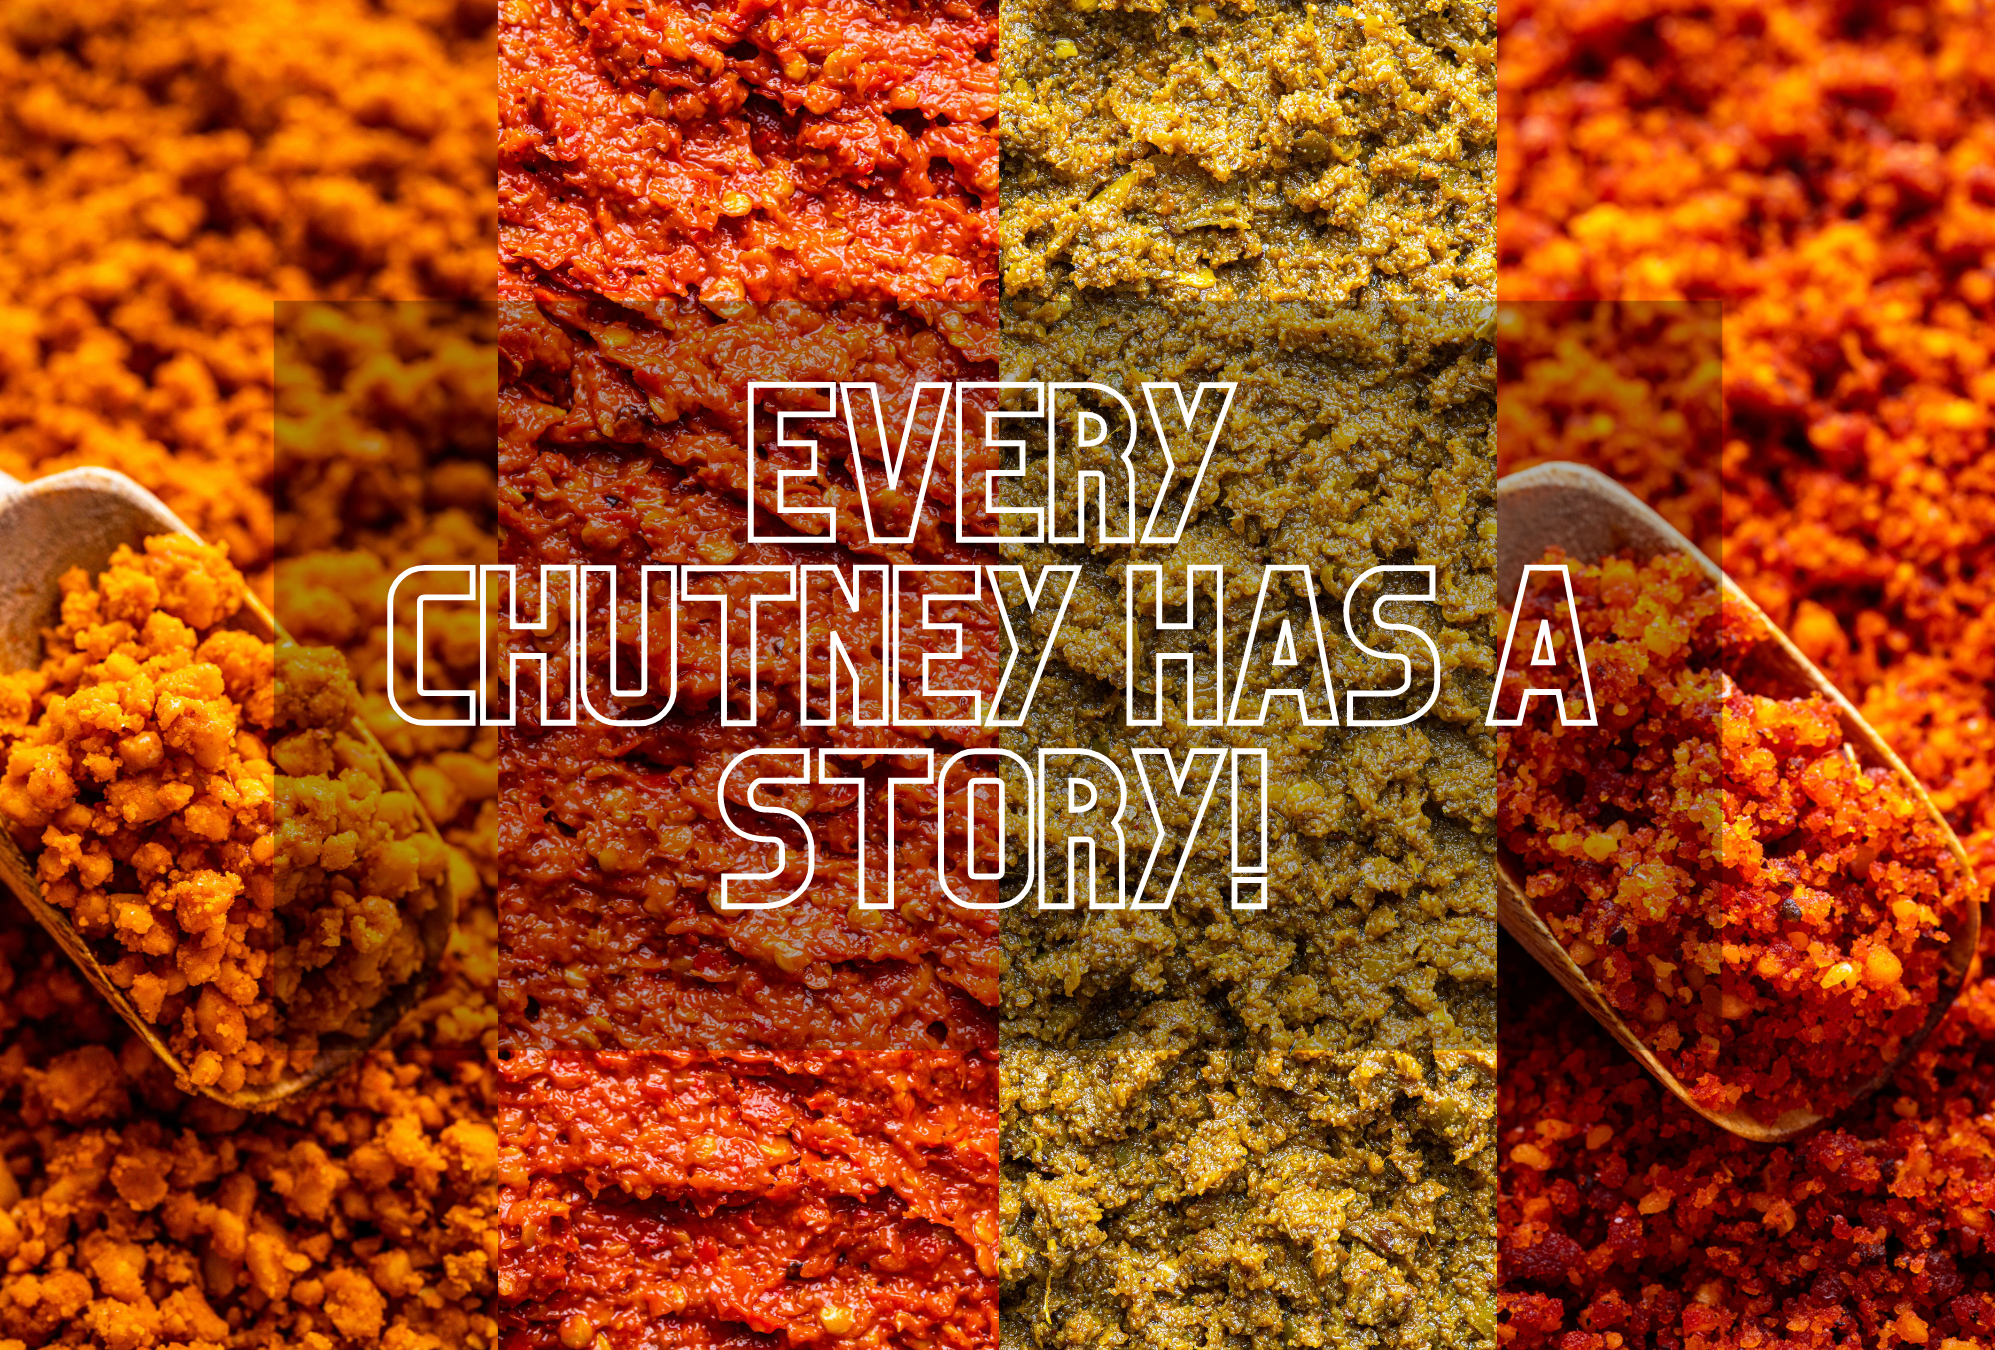 Sweet Memories & Unique Flavours: Every Chutney Has a Story!